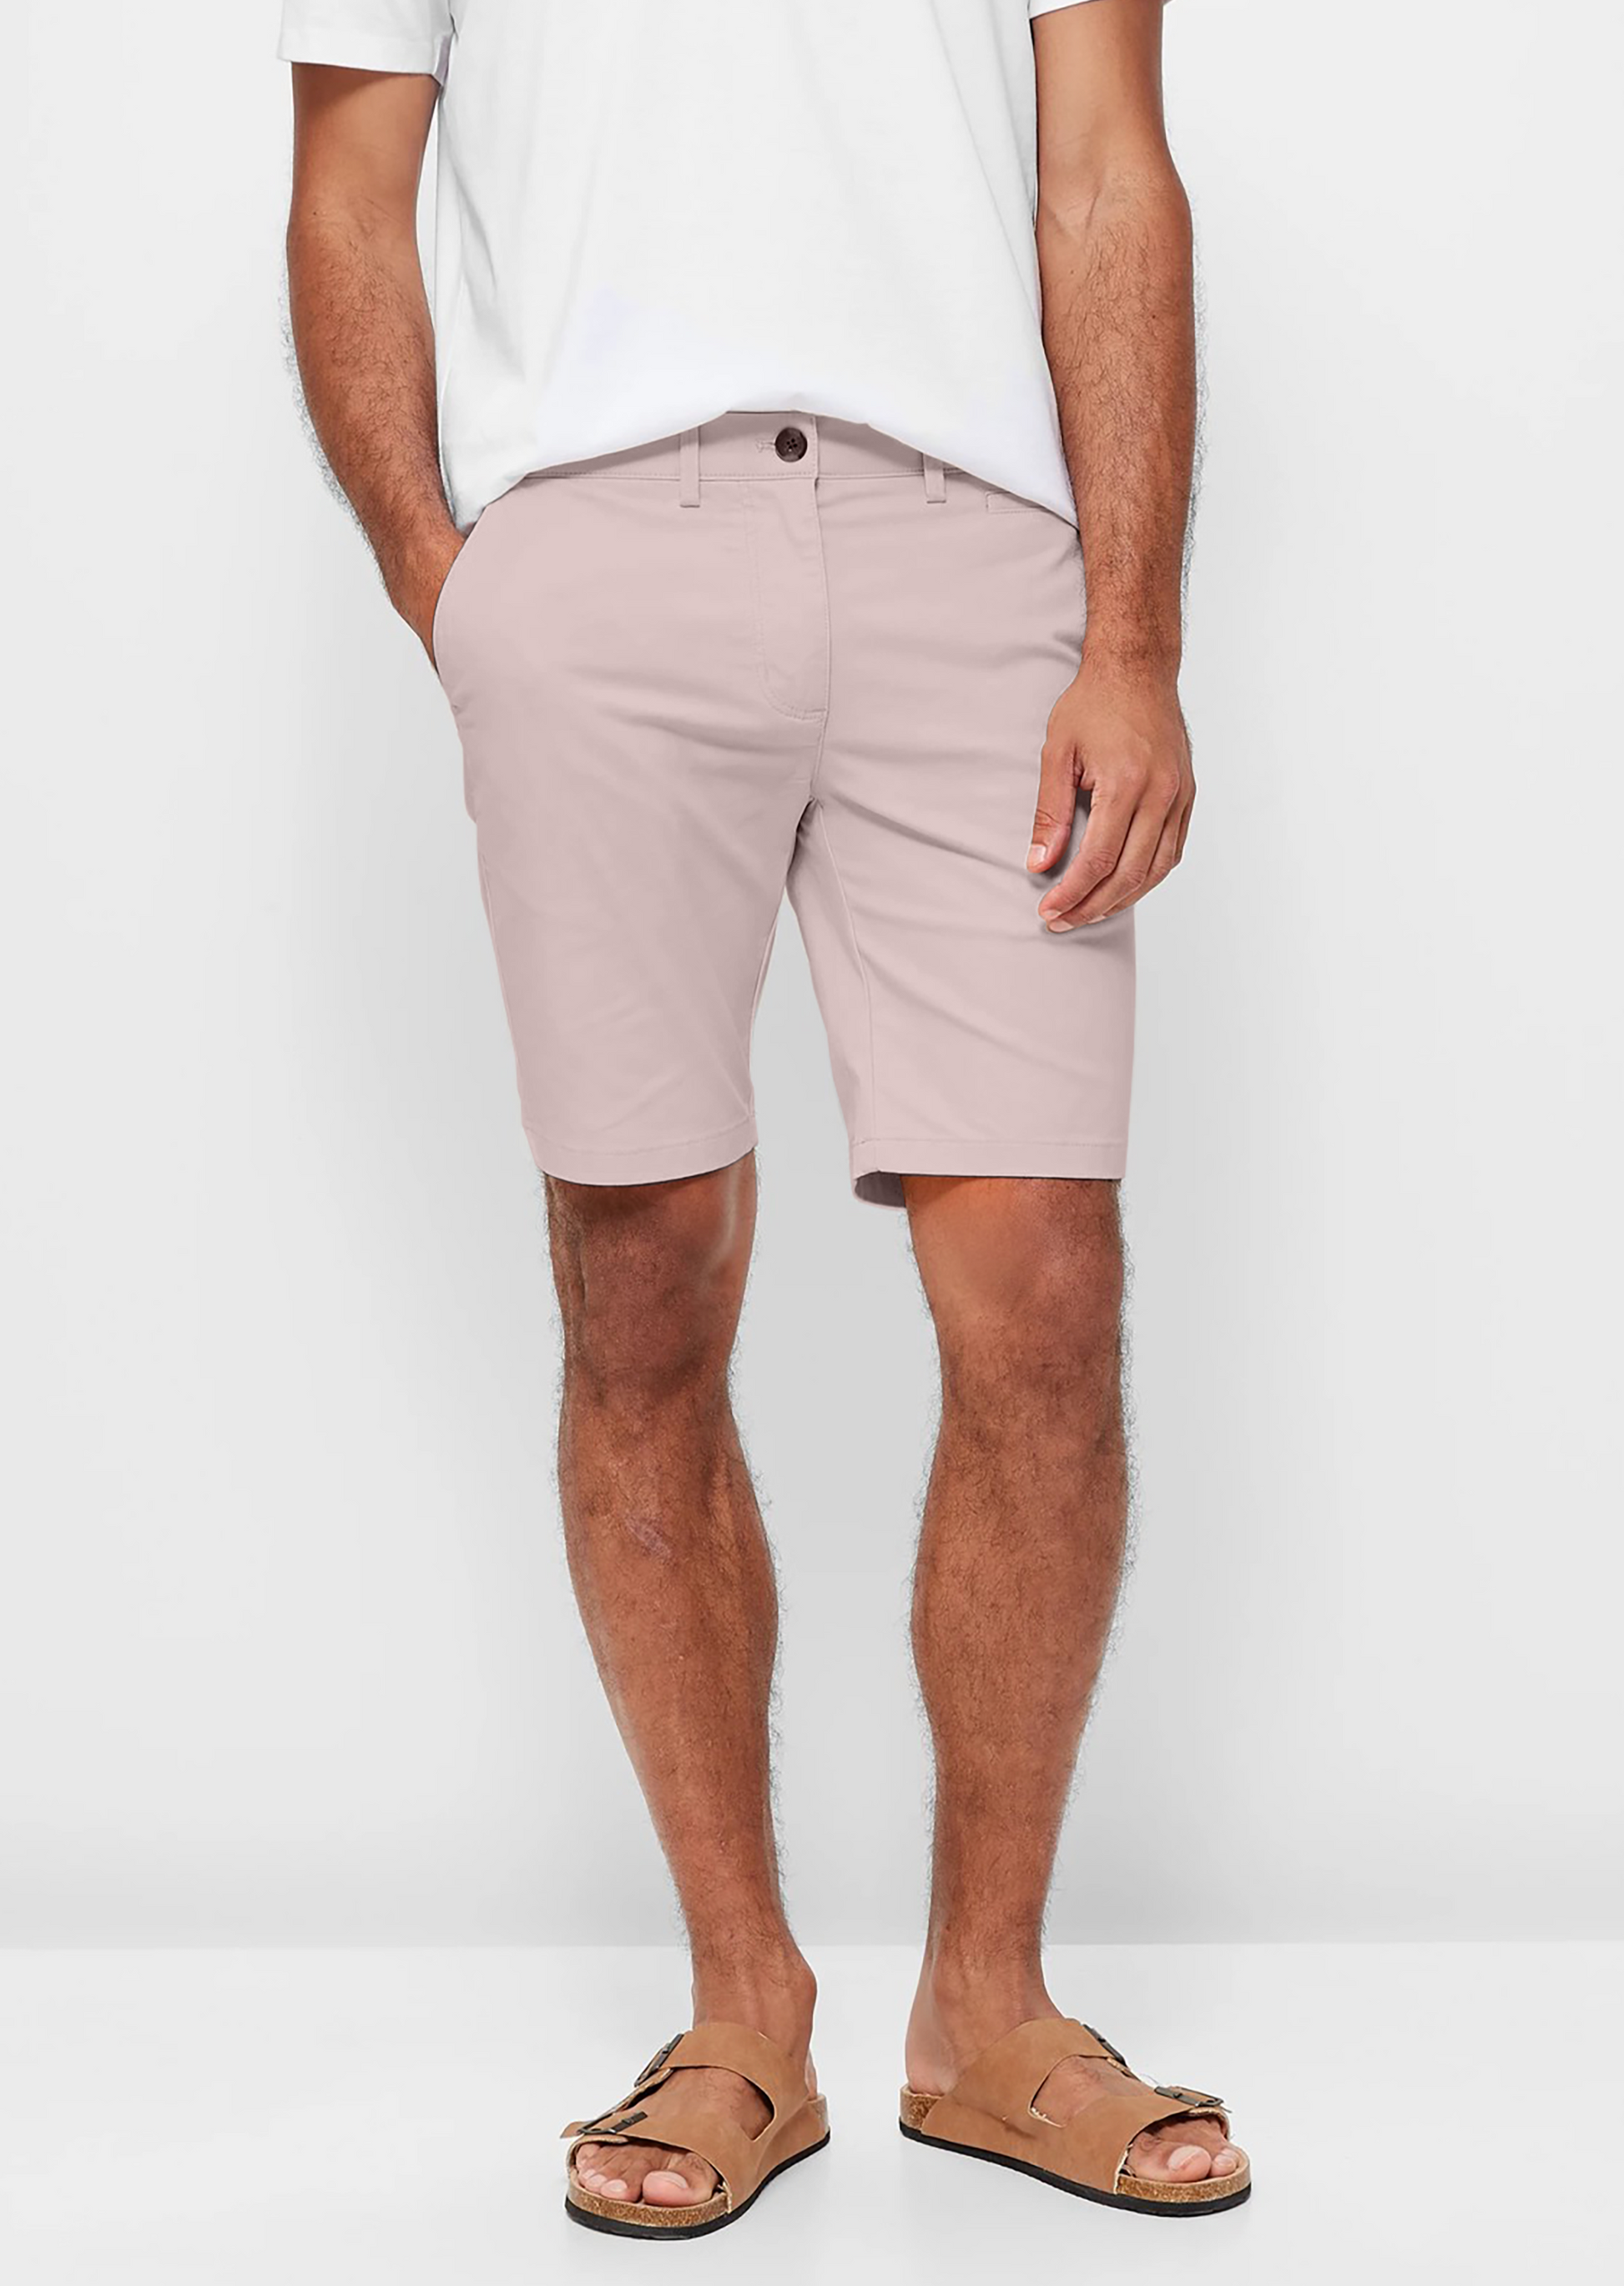 Mens pale pink chinos shorts with front slanted pockets, jetted back pockets. zip fly fastening and brown horne buttons on the waistband and back pockets, the fit is a slim fit, this is worn with a white tee and white t-shirt